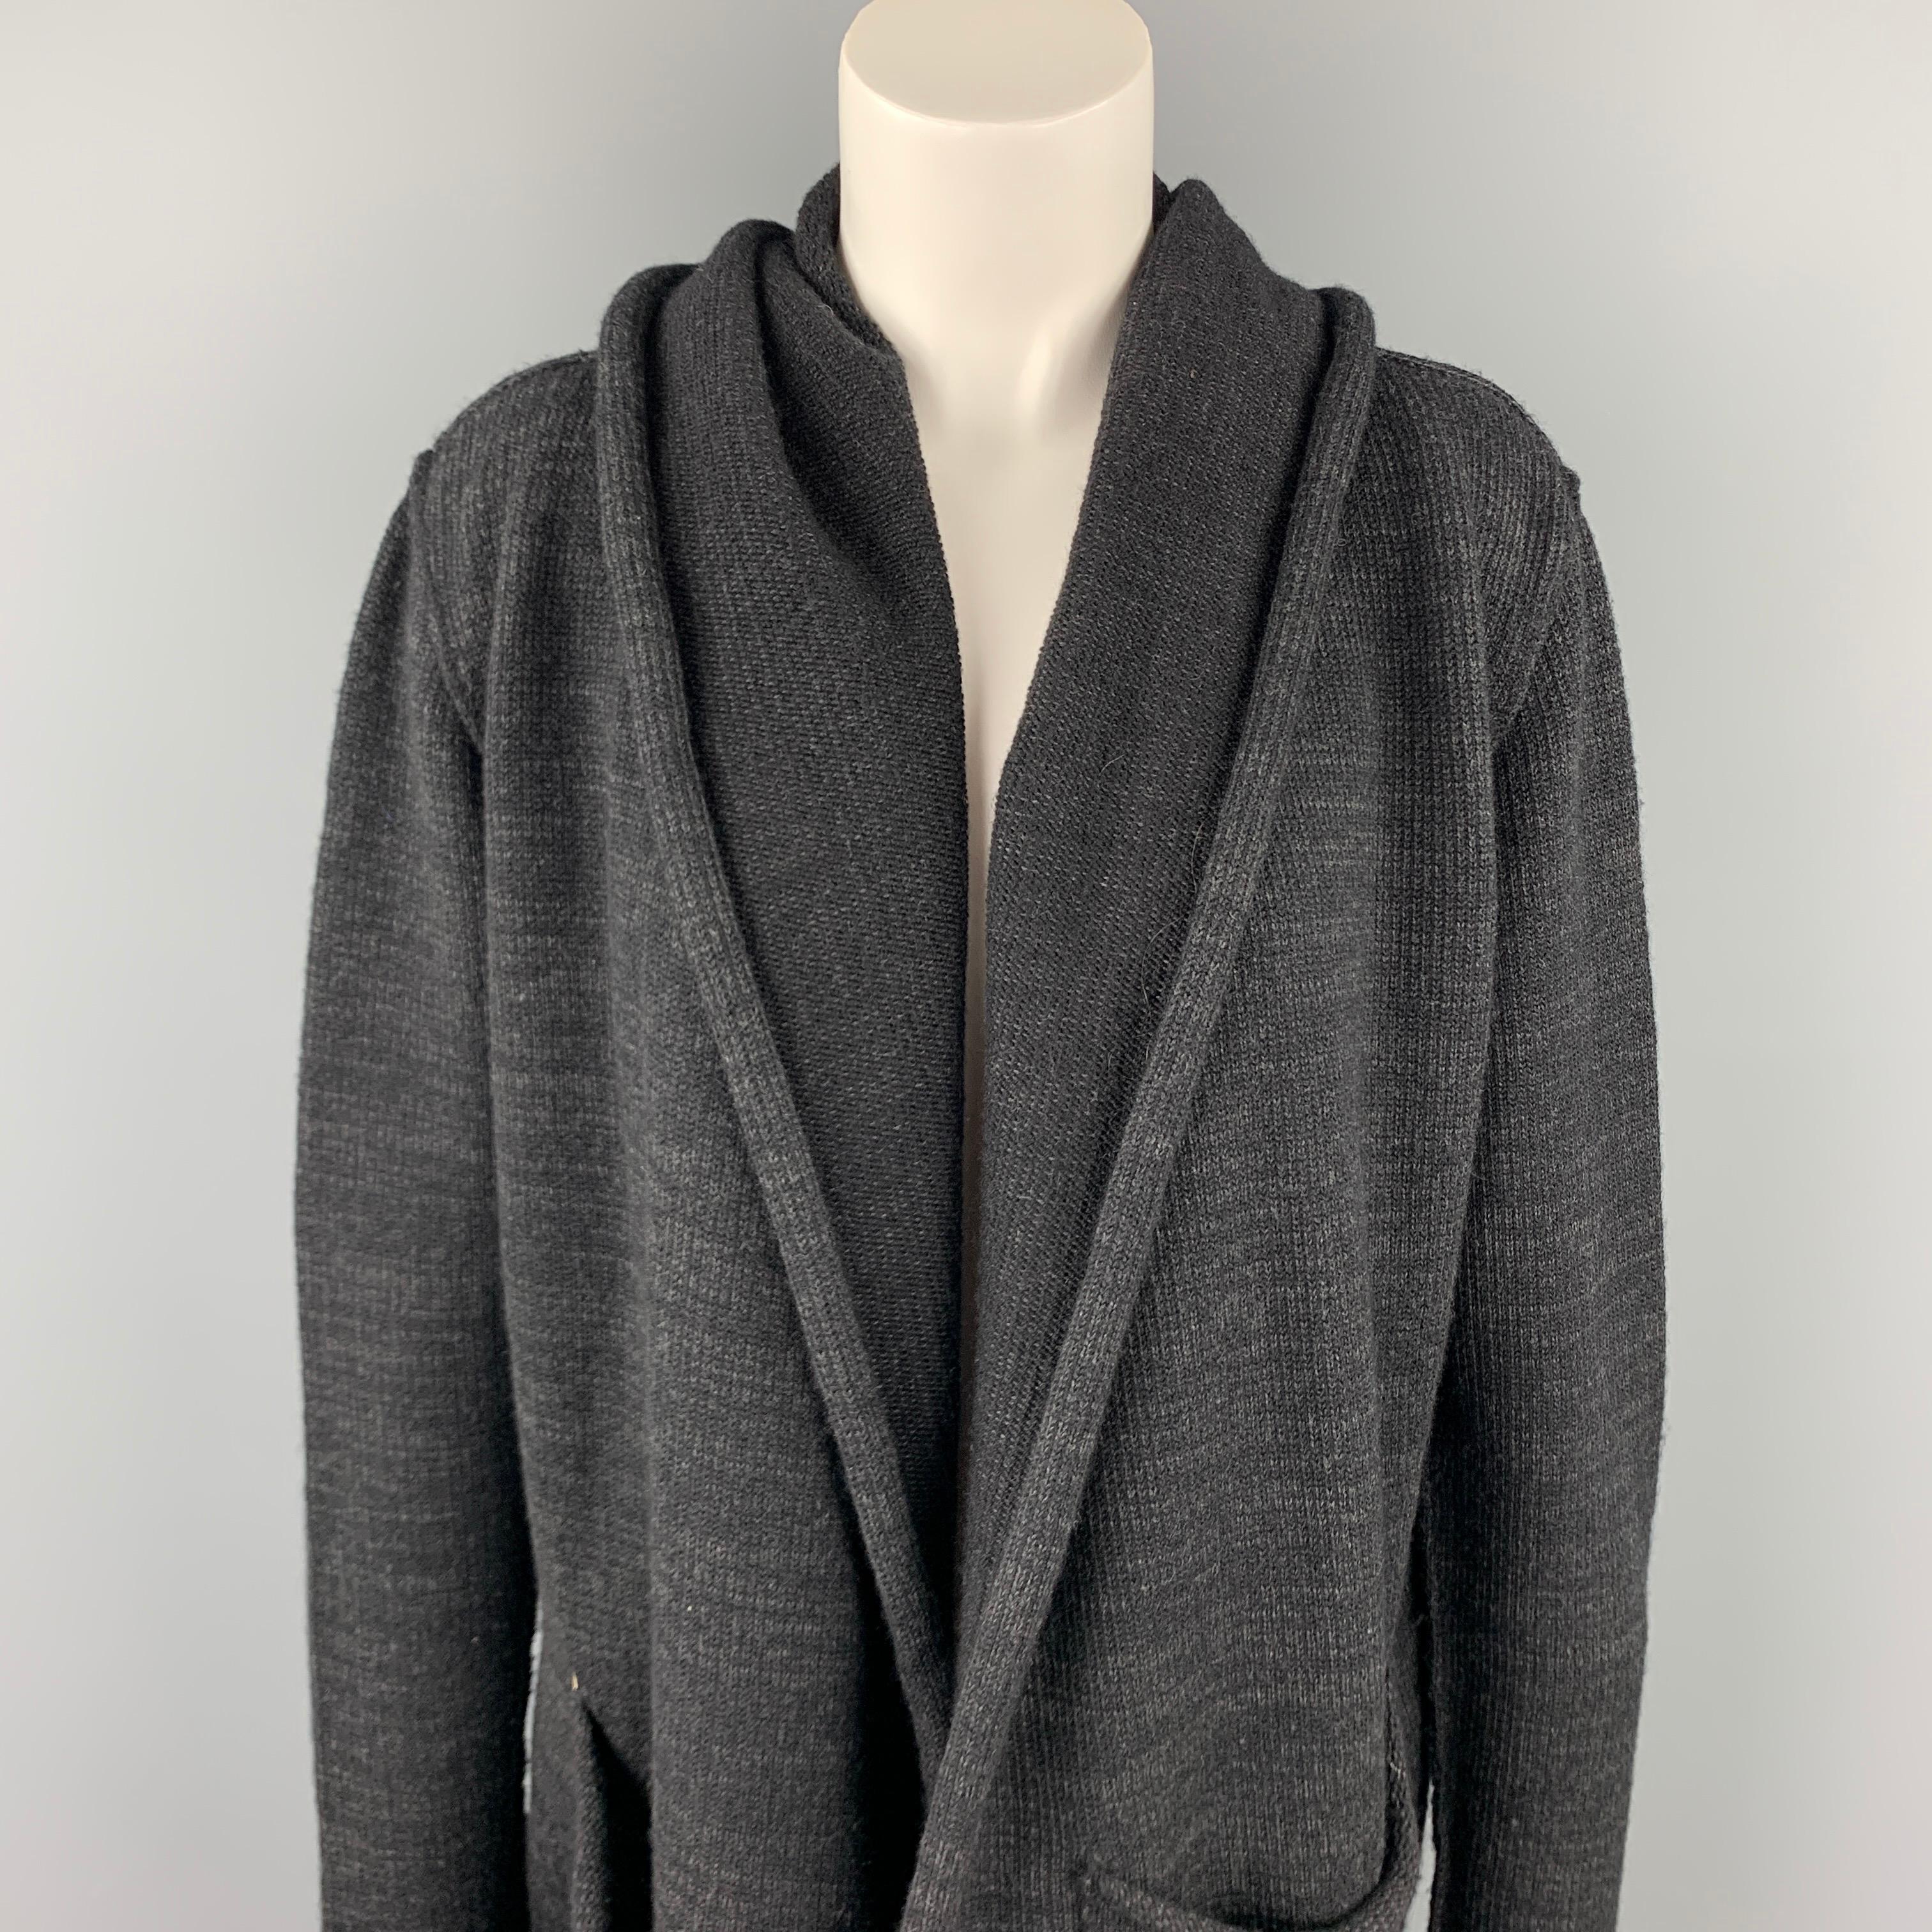 LARS ANDERSON cardigan comes in a charcoal knitted material featuring a hooded style, front pockets, and a open front. Made in USA.

Very Good Pre-Owned Condition.
Marked: 8

Measurements:

Shoulder: 17 in.
Bust: 42 in. 
Sleeve: 29 in.
Length: 27